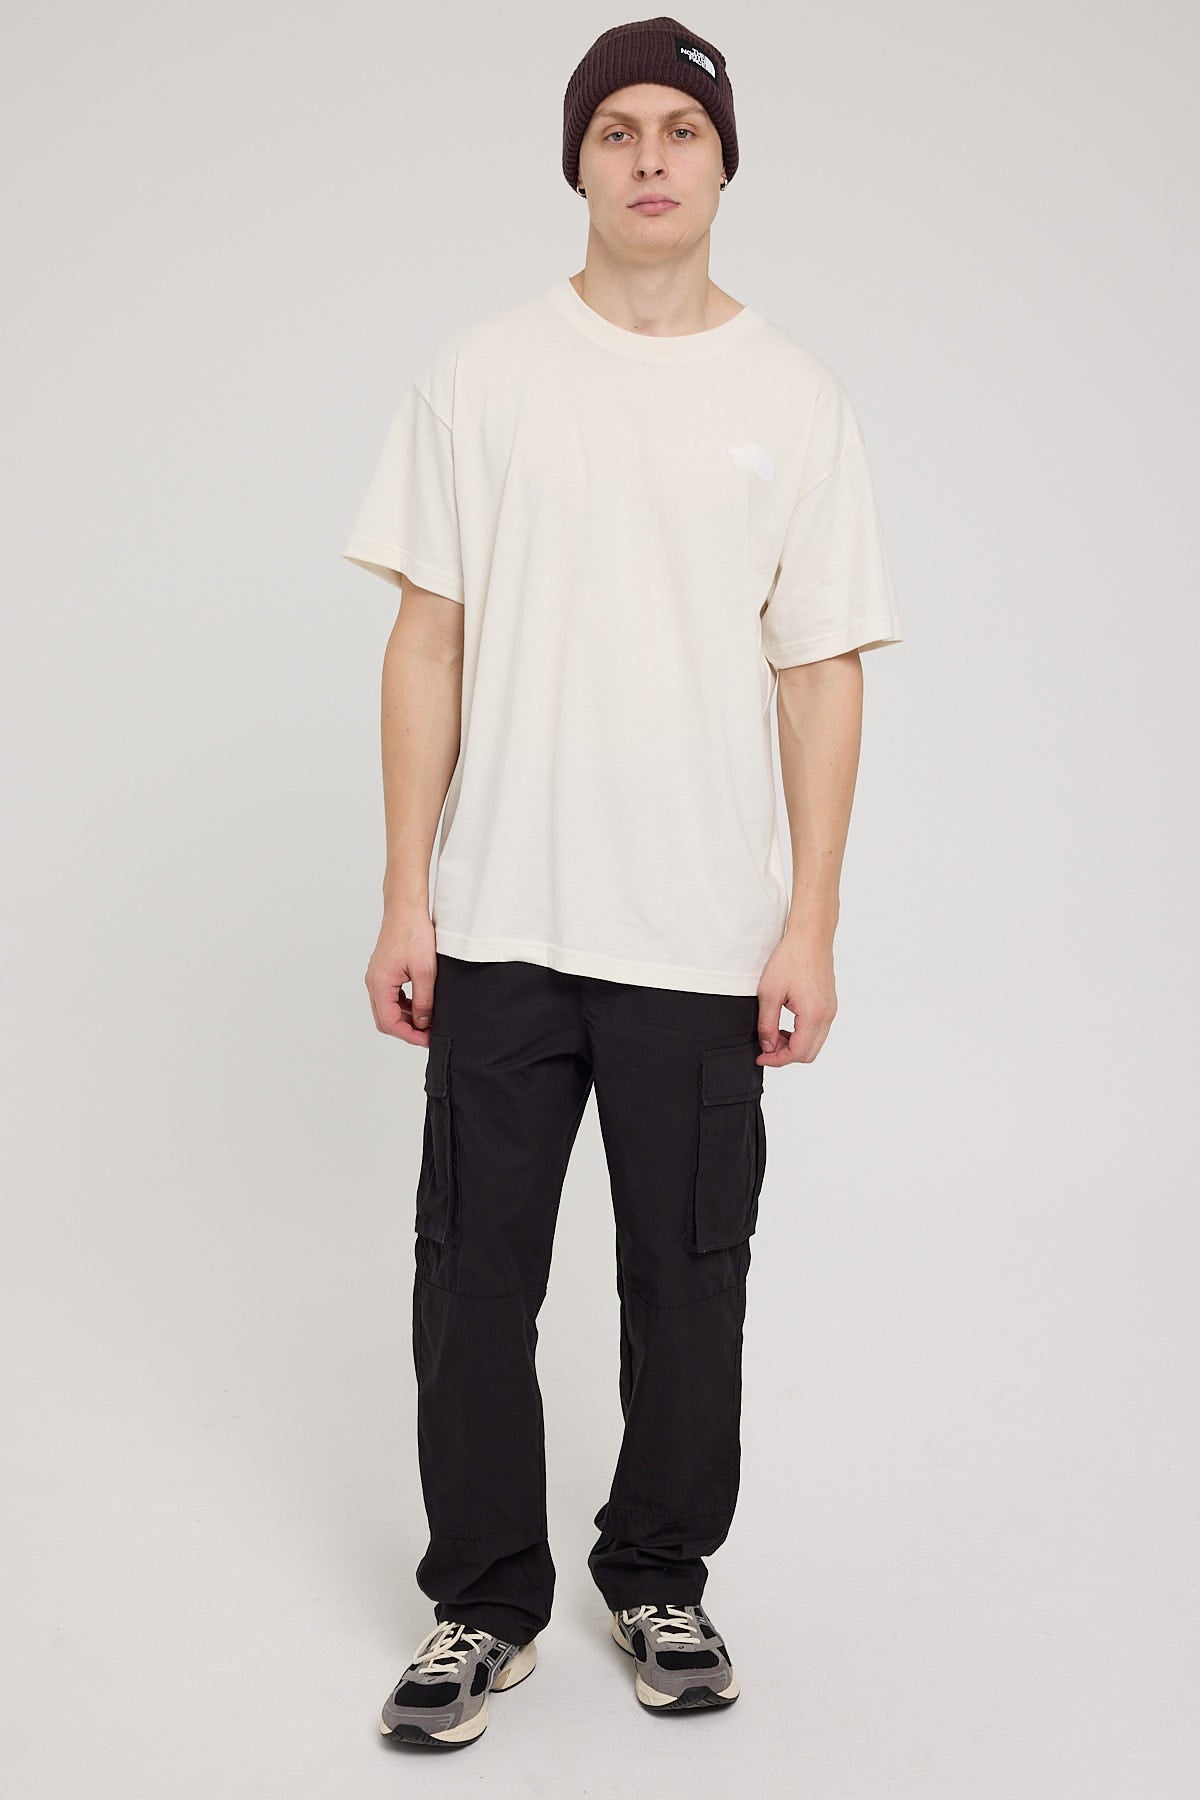 The North Face Evolution Box Fit Tee White Dune